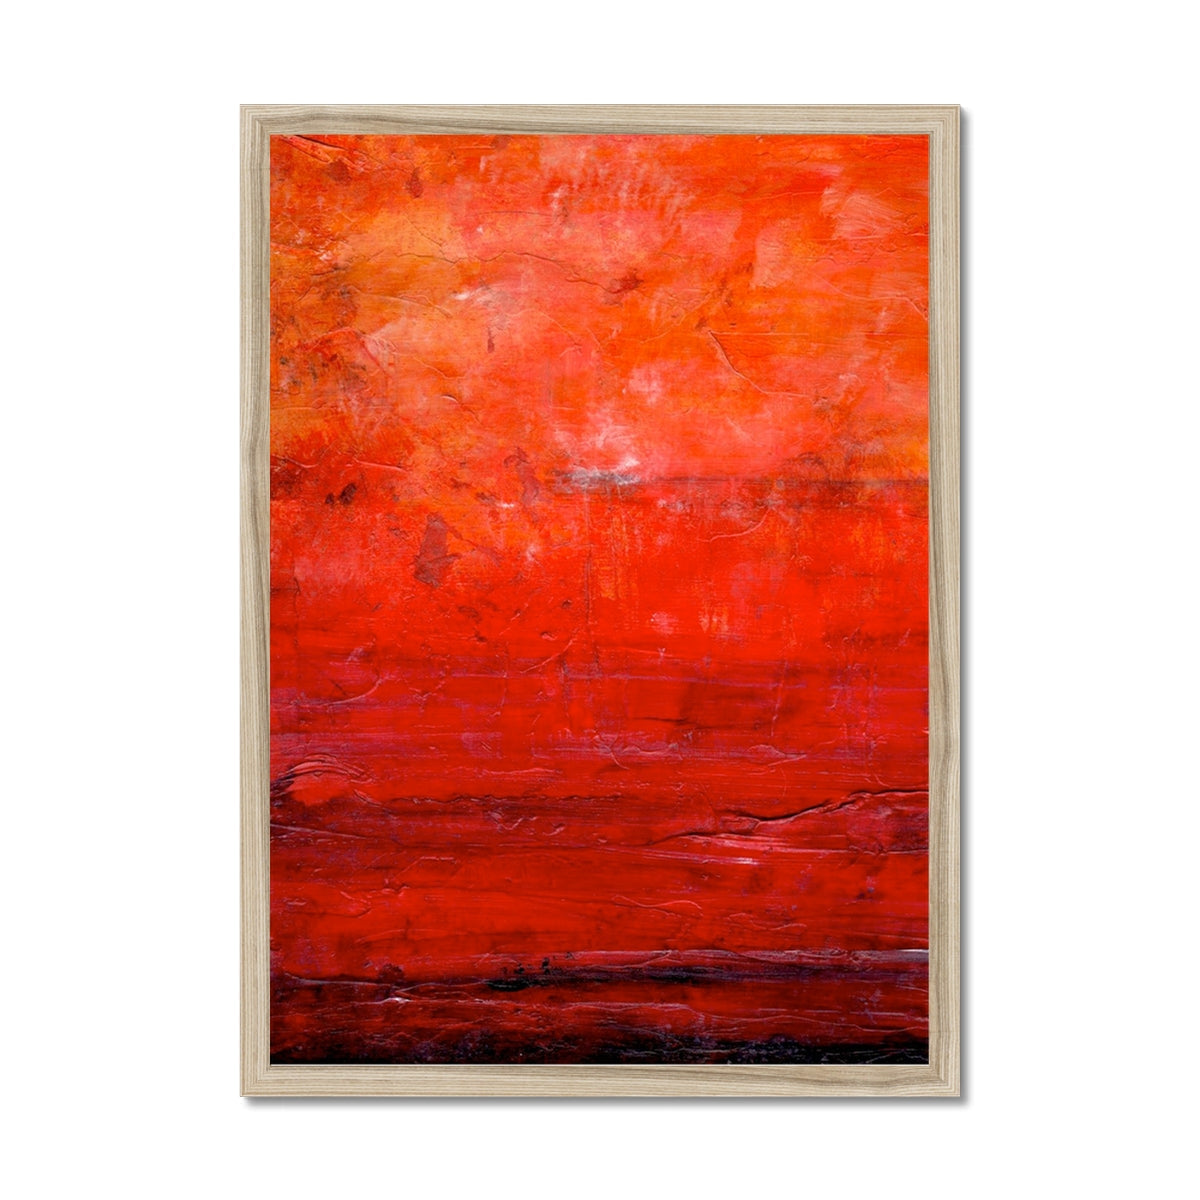 Abstract Summer Painting | Framed Prints From Scotland-Framed Prints-Abstract & Impressionistic Art Gallery-A2 Portrait-Natural Frame-Paintings, Prints, Homeware, Art Gifts From Scotland By Scottish Artist Kevin Hunter